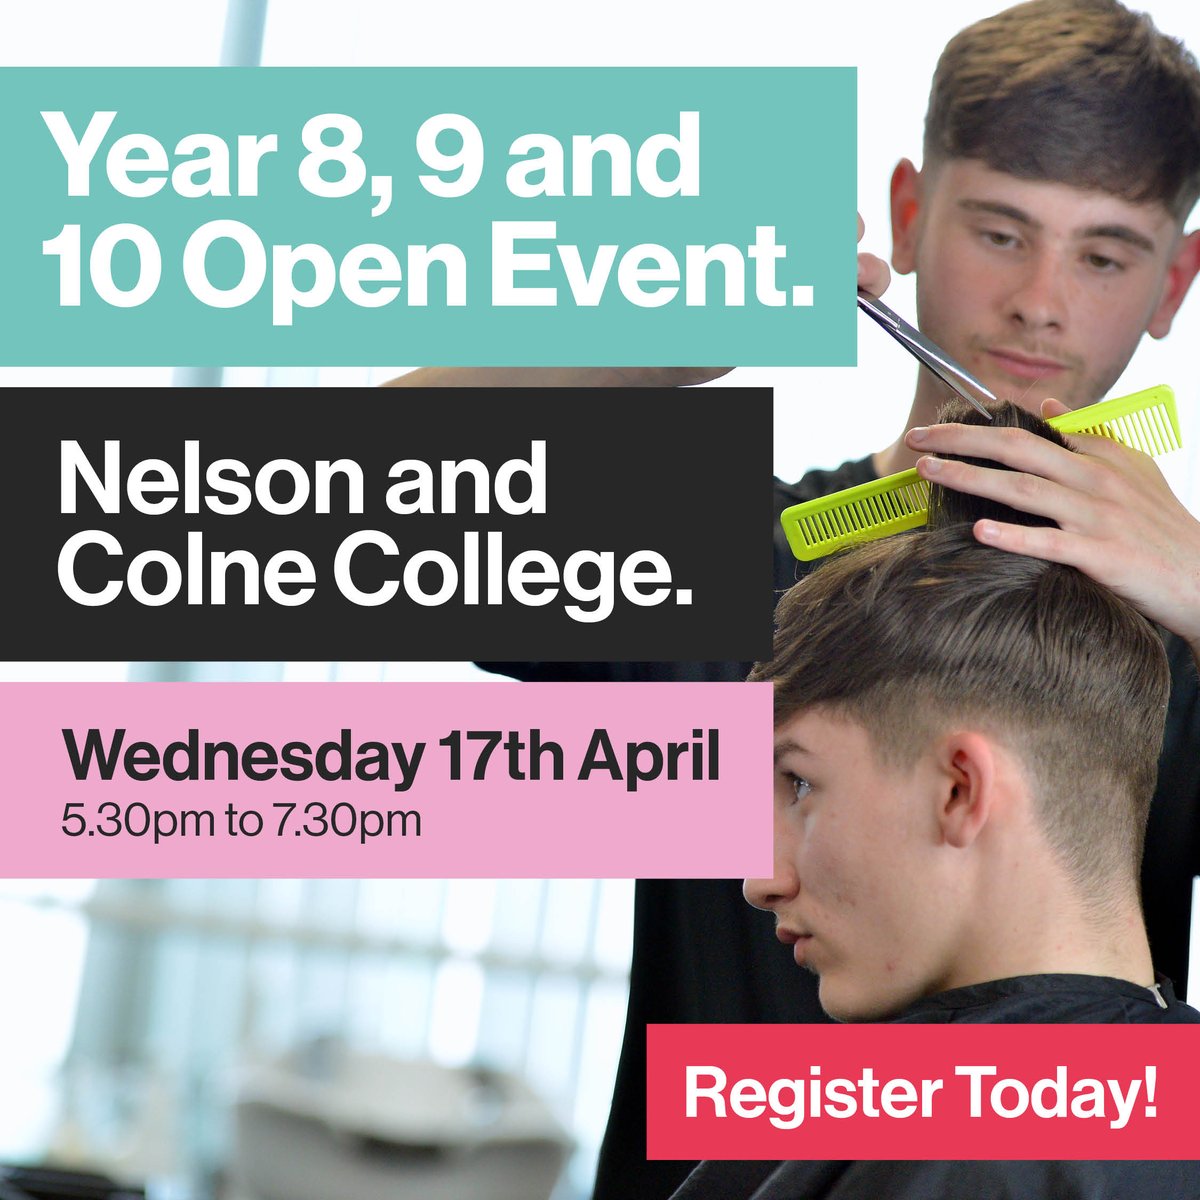 ONE Day to Go🌟 We have a fantastic opportunity at a college like no other at our Year 8, 9 and 10 Open Event!🙌 📌You still have time to register! Check it out here - eventbrite.com/e/year-8-9-10-… #OpenEvent #Careers #schoolleaver